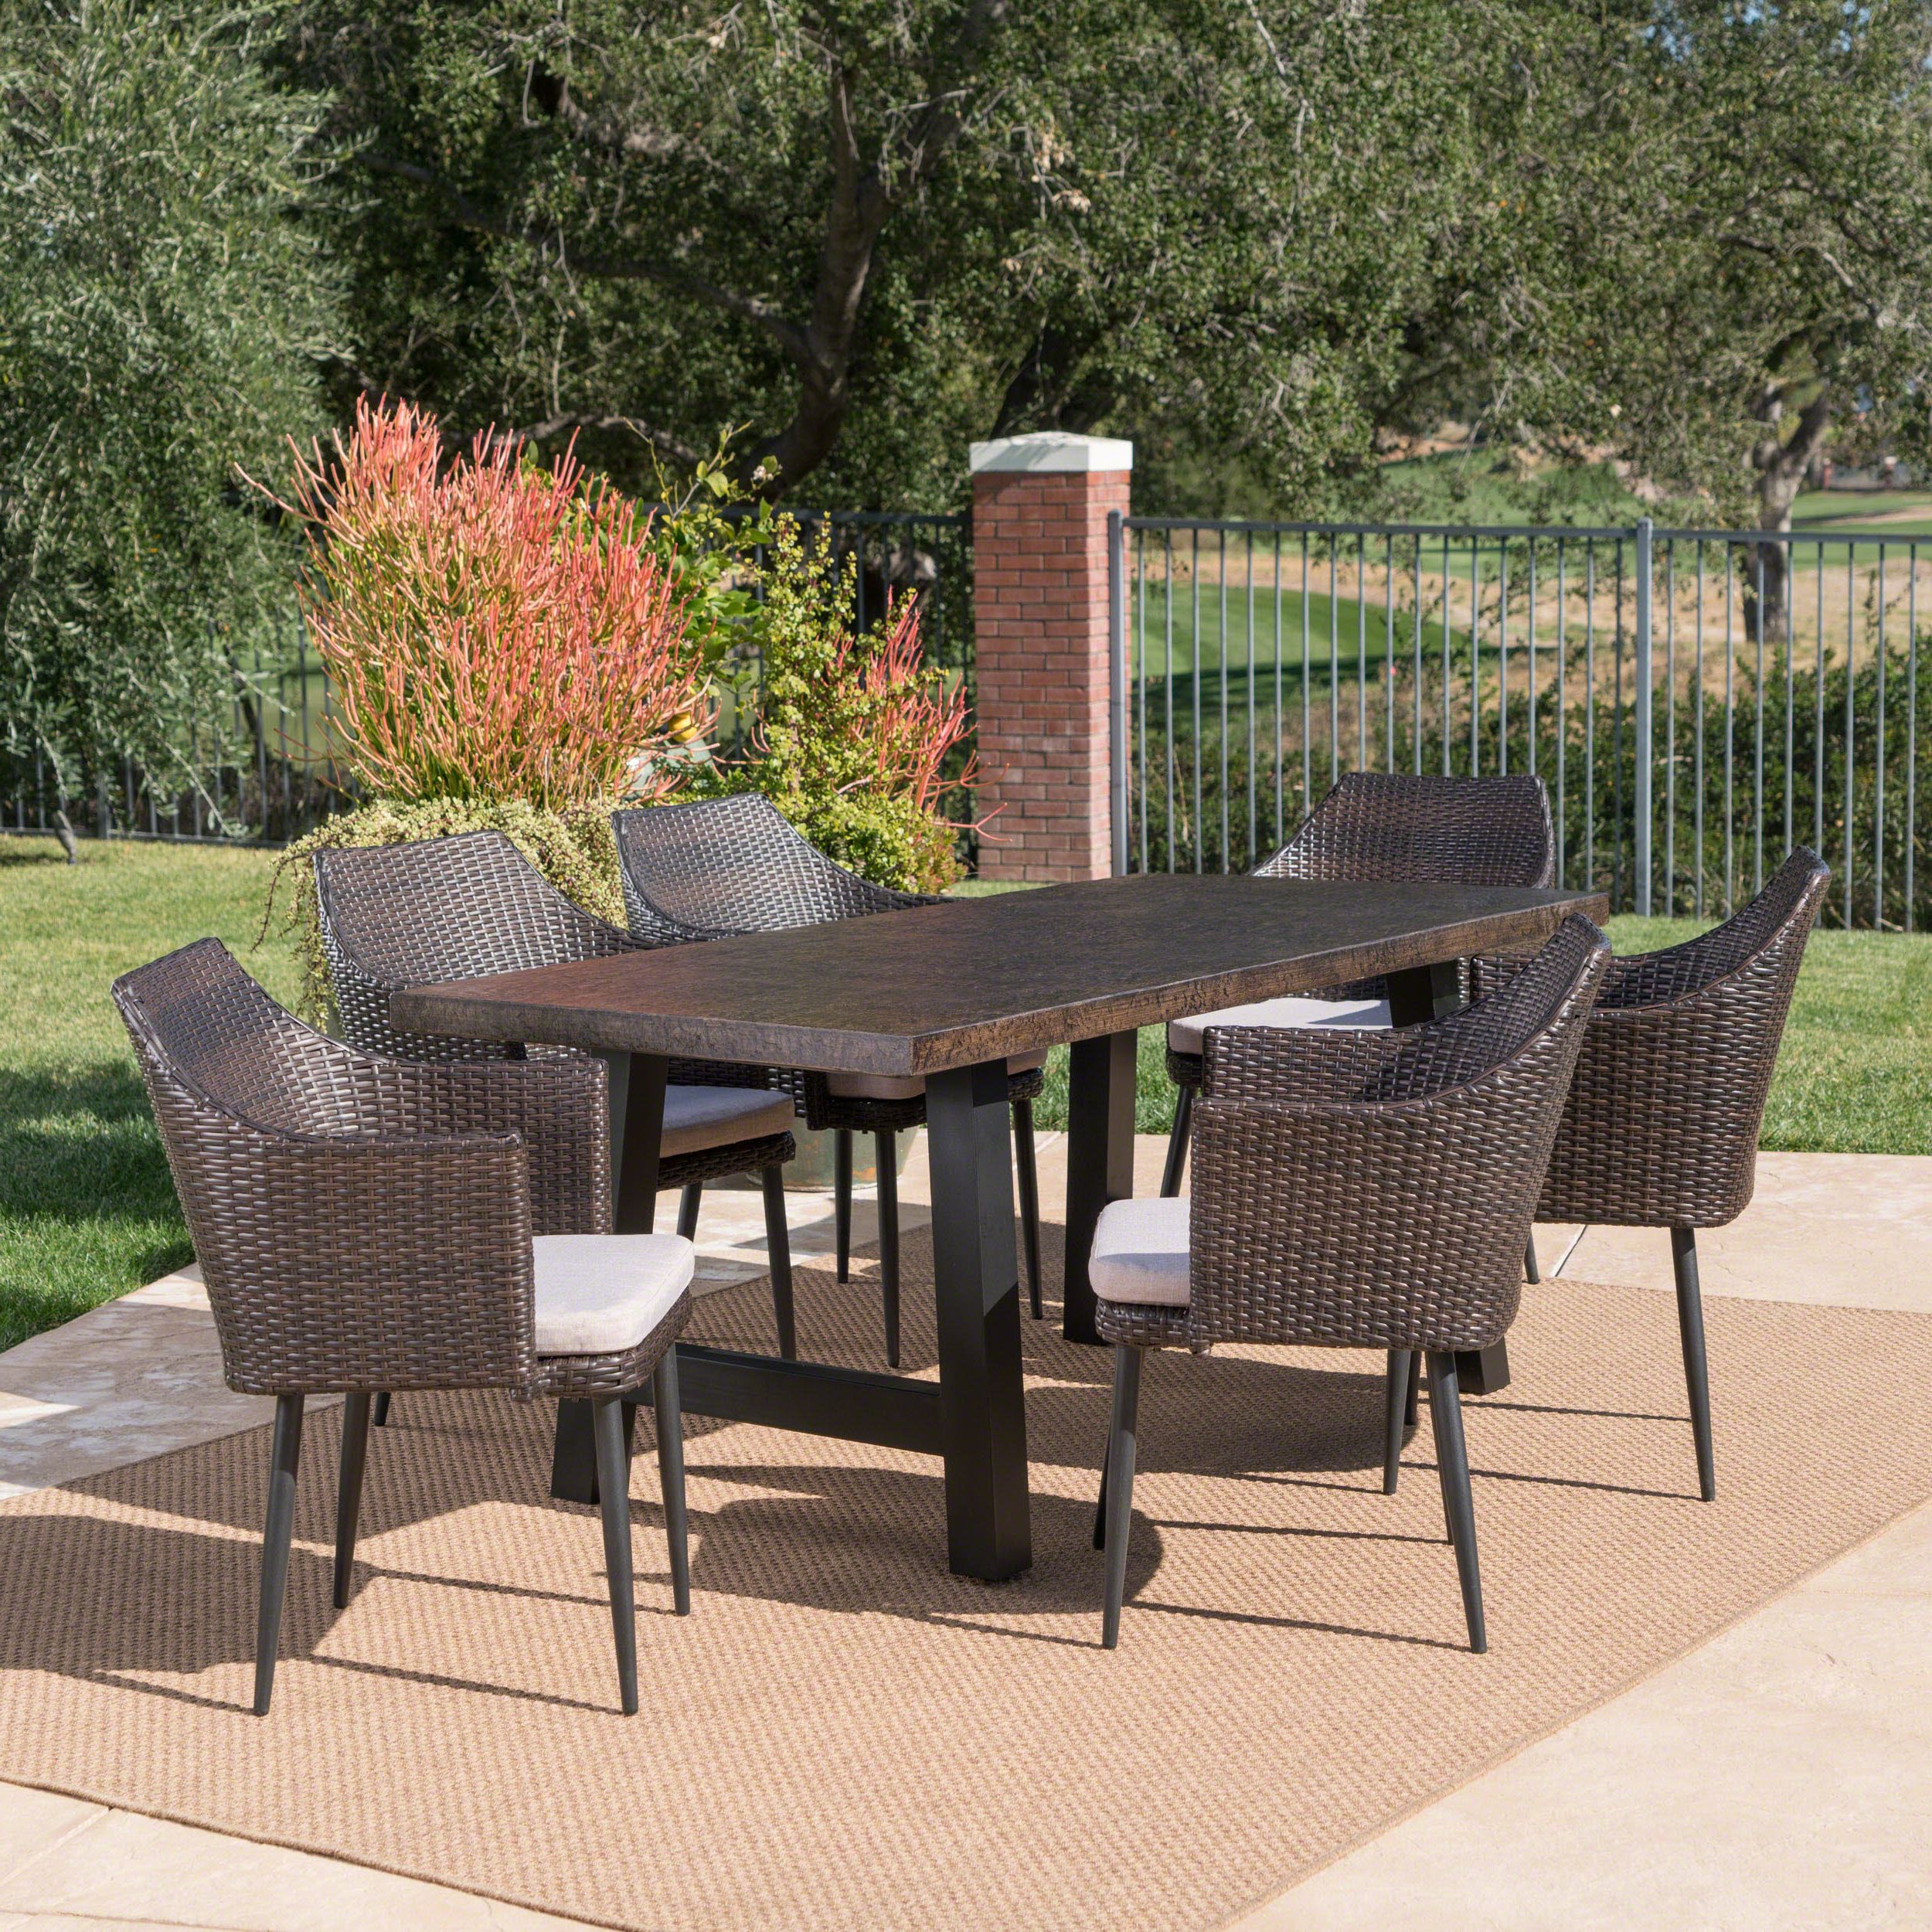 Porter Outdoor 7 Piece Wicker Dining Set With Light Weight Concrete Inside Favorite Rattan Wicker Outdoor Seating Sets (View 9 of 15)